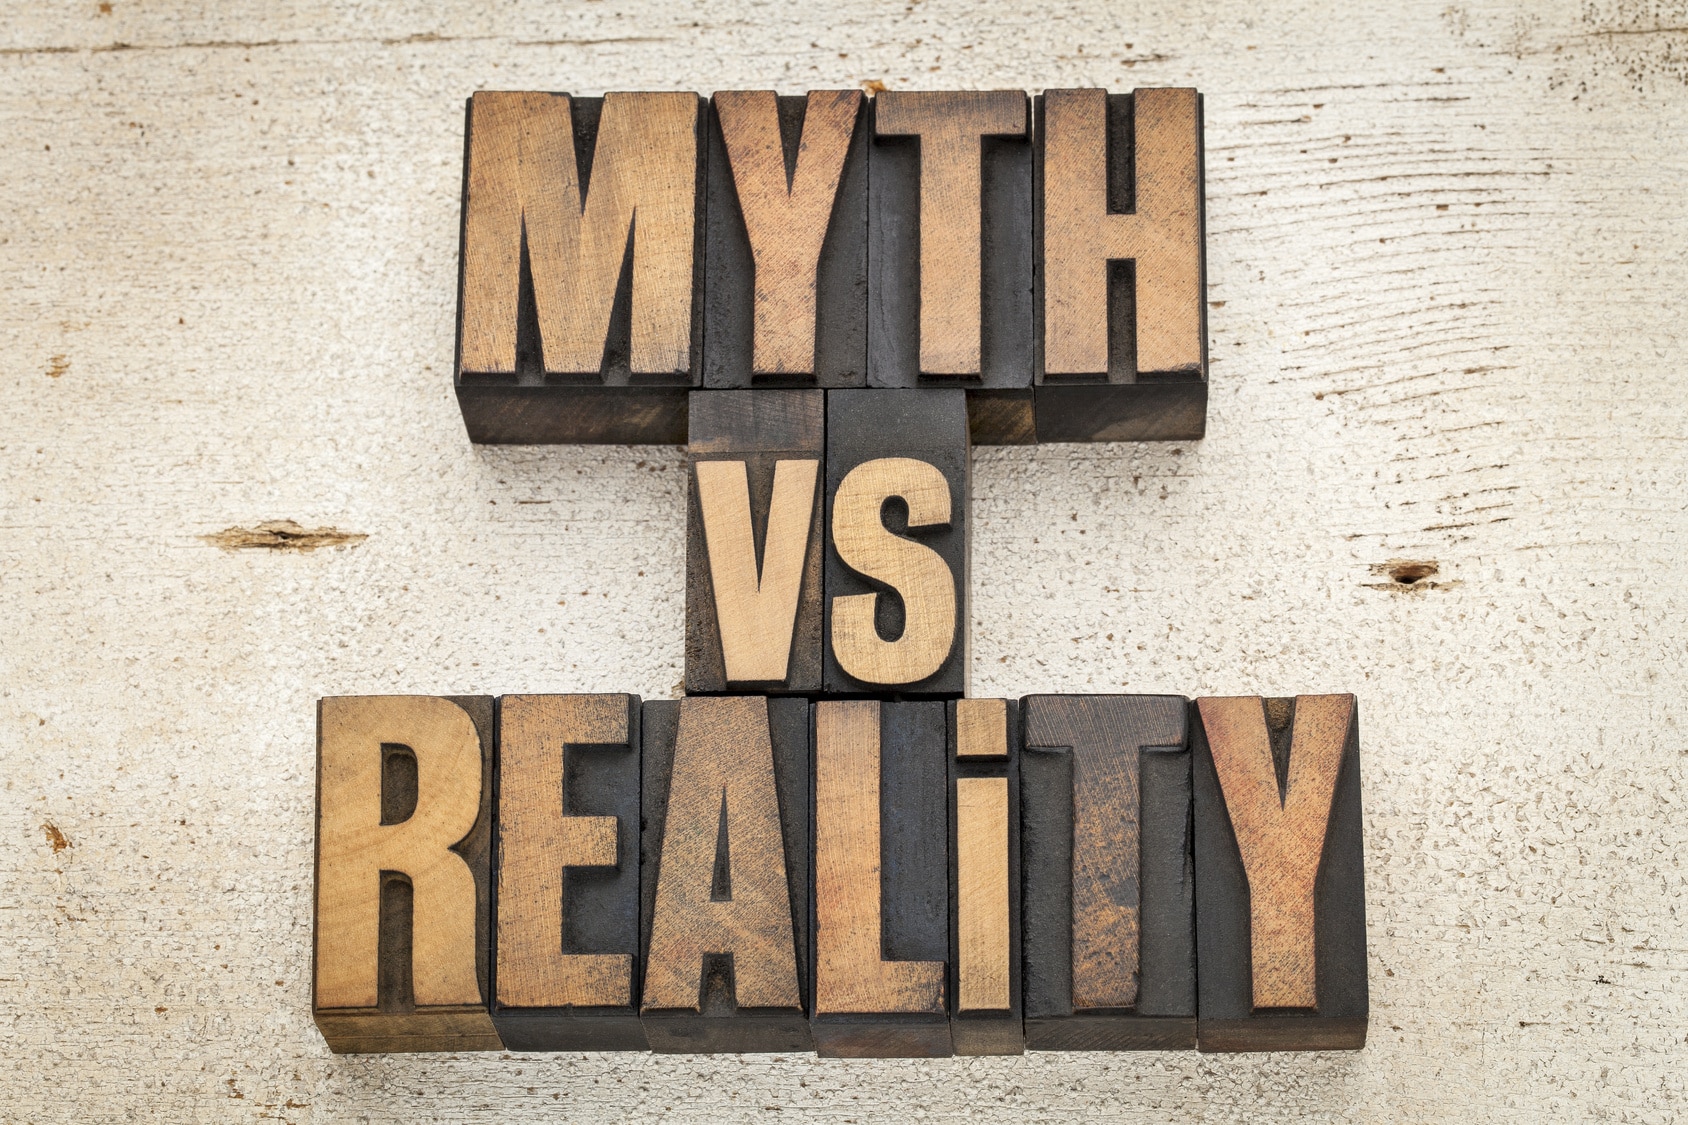 Private ESL tuition myths and misconceptions